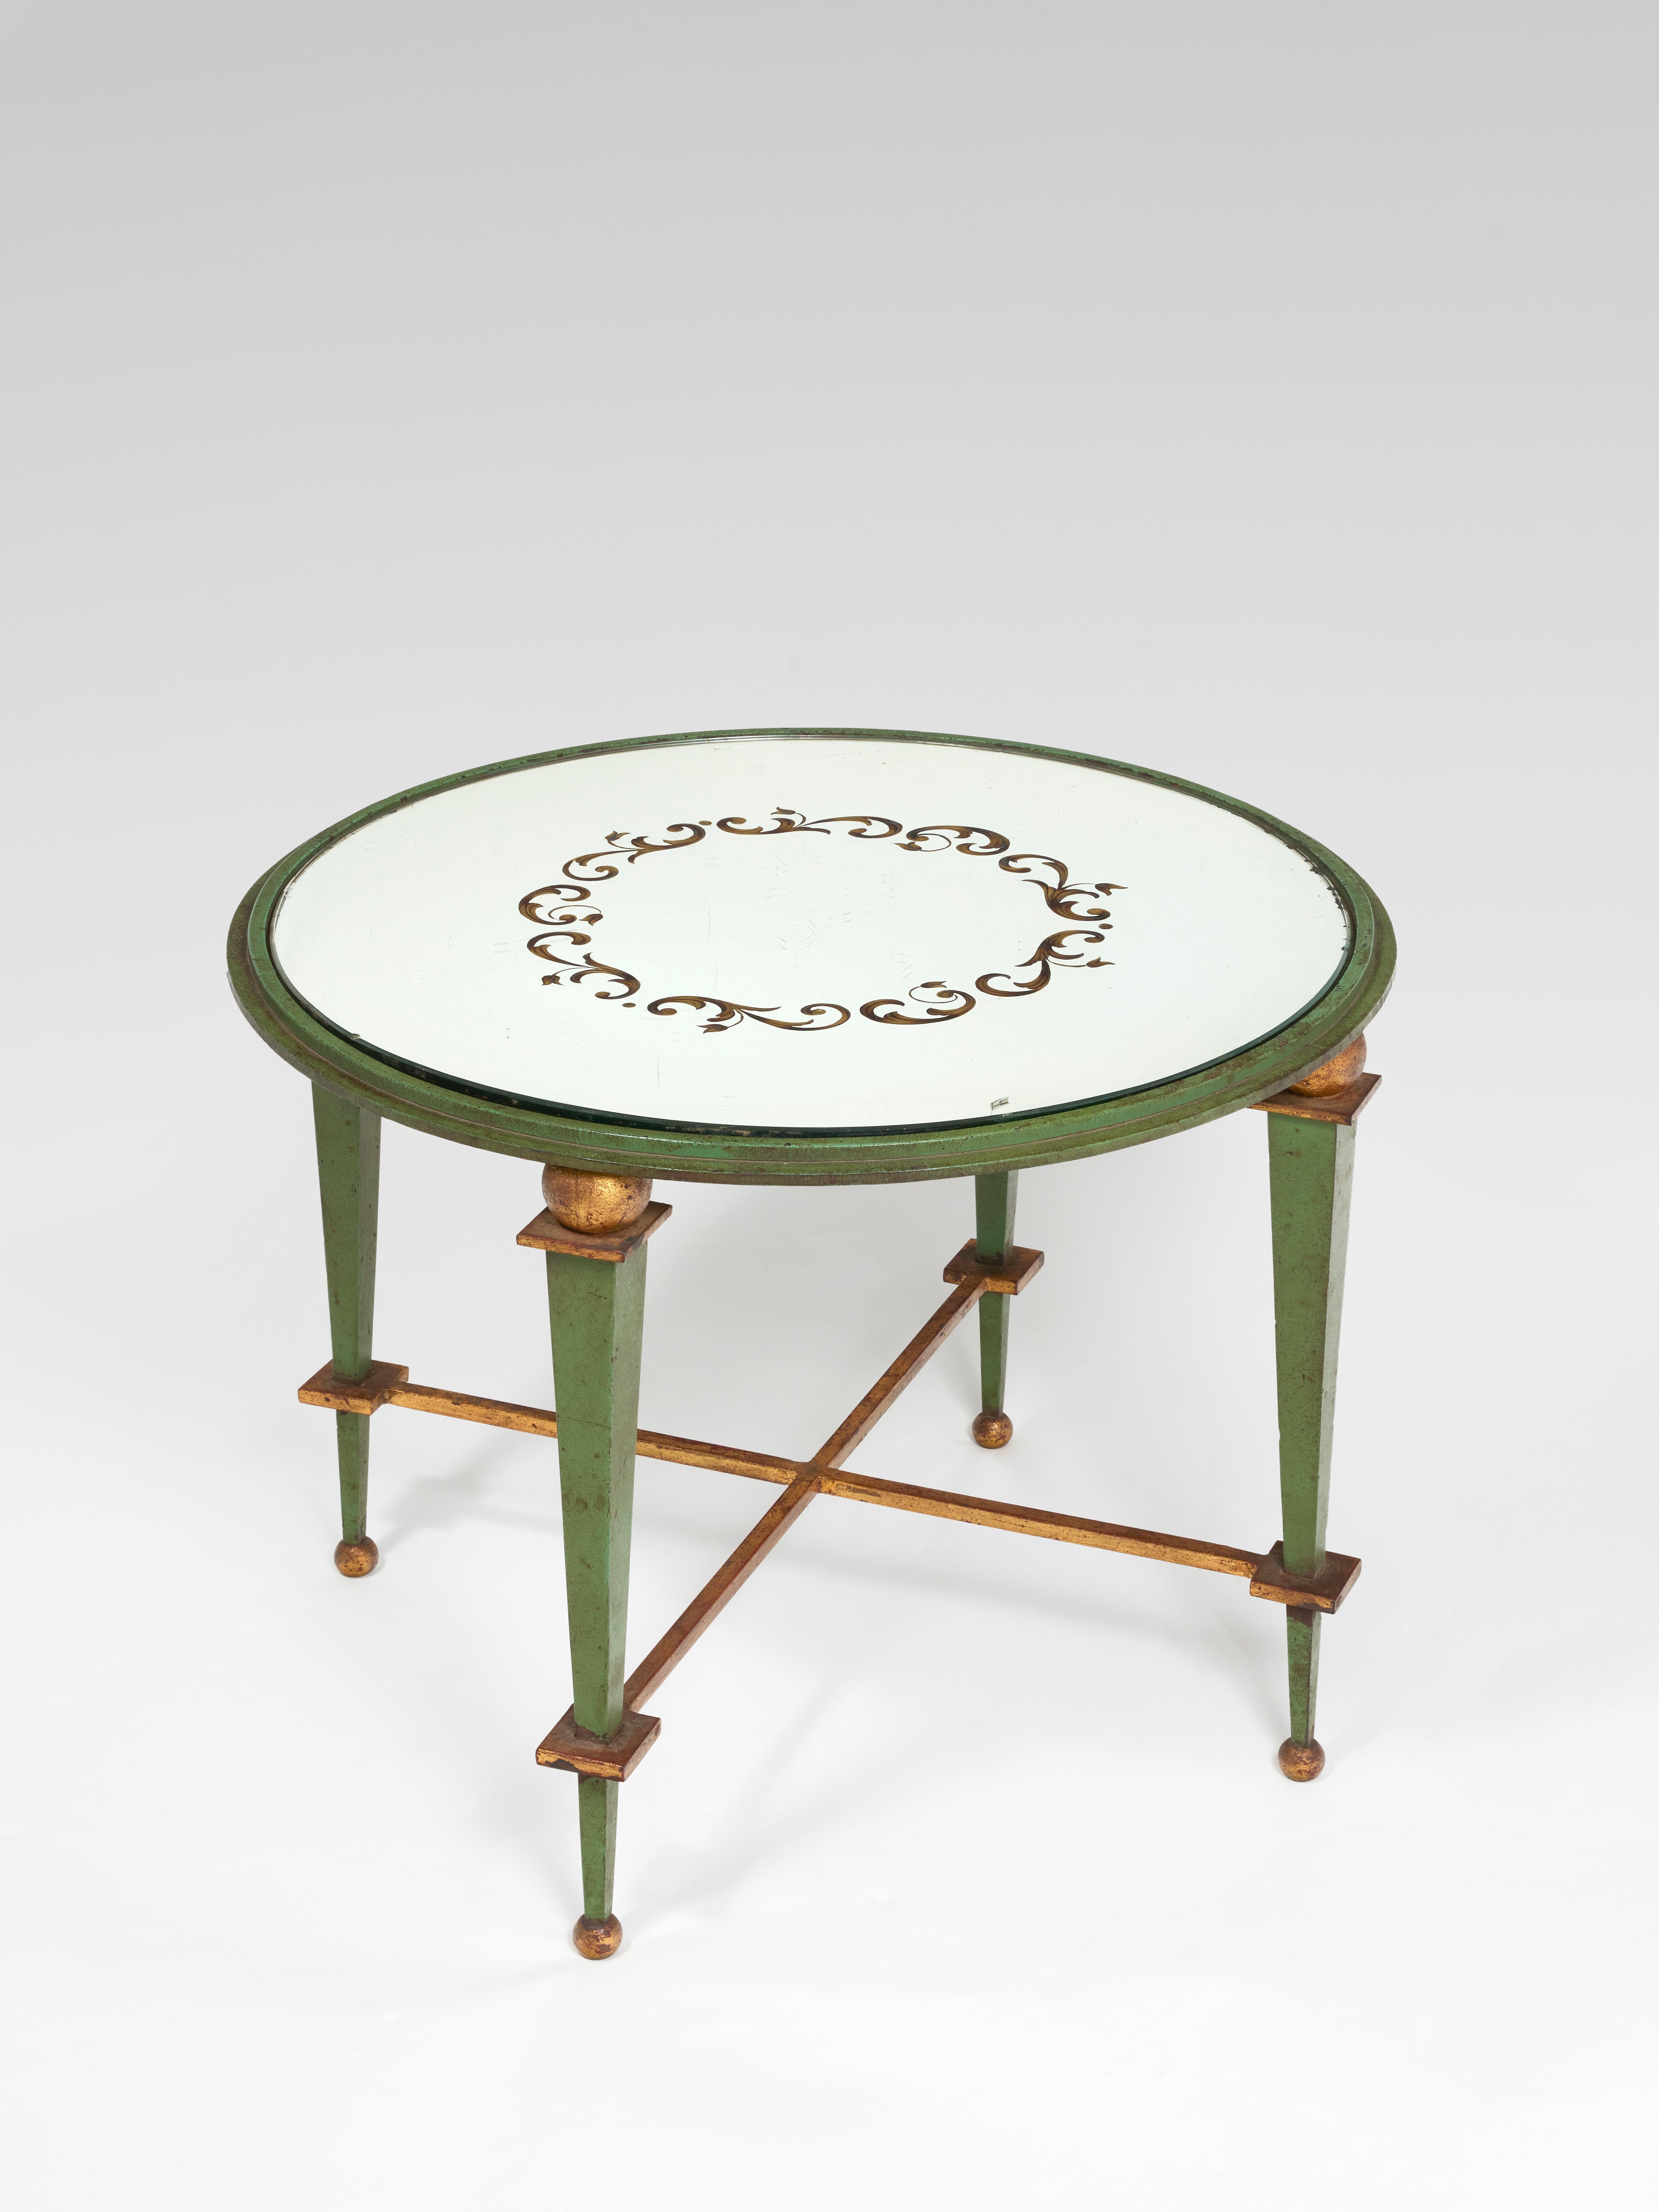 Coffee table with circular top in eglomerate glass with interlacing decoration.
Green and gold wrought iron base with four legs joined by an 